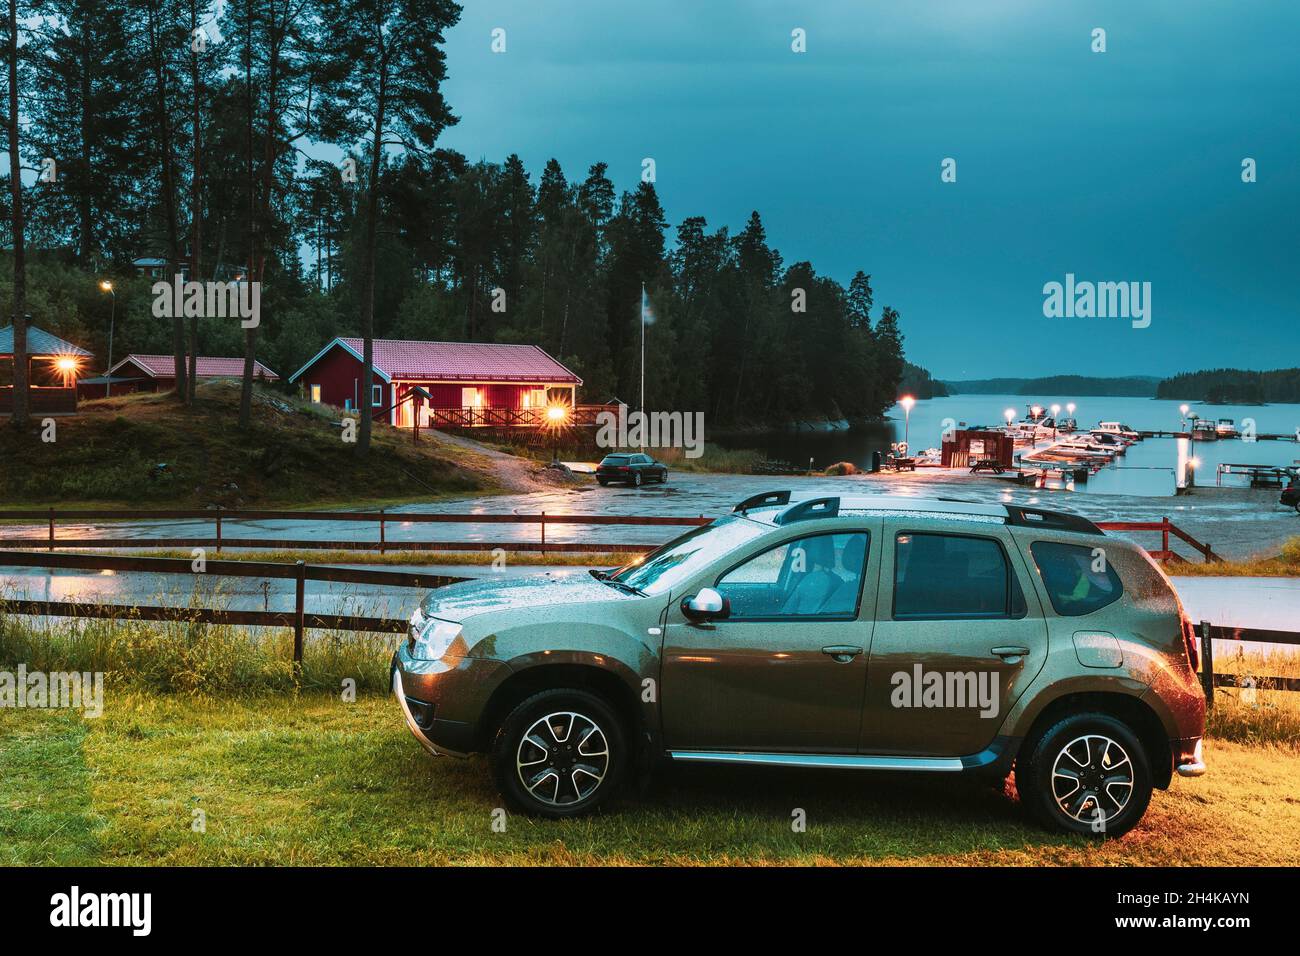 Car SUV Parked Near Lake Or River Landscape In Swedish Countryside Landscape. Summer Evening Night. Stock Photo